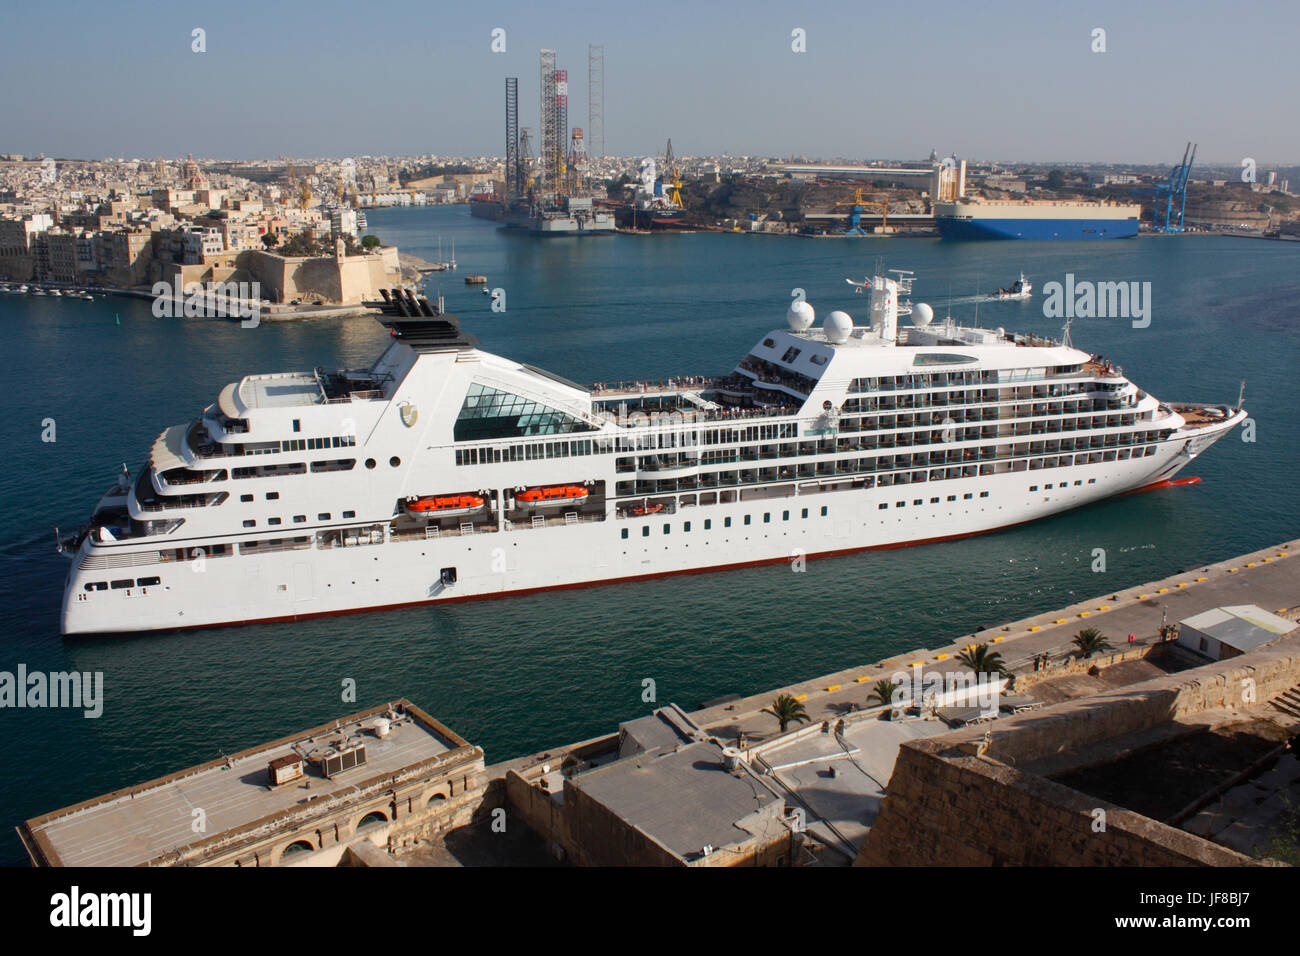 Mediterranean travel and tourism. The cruise ship Seabourn Odyssey on arrival in the Grand Harbour of Malta. Geography and economic development. Stock Photo